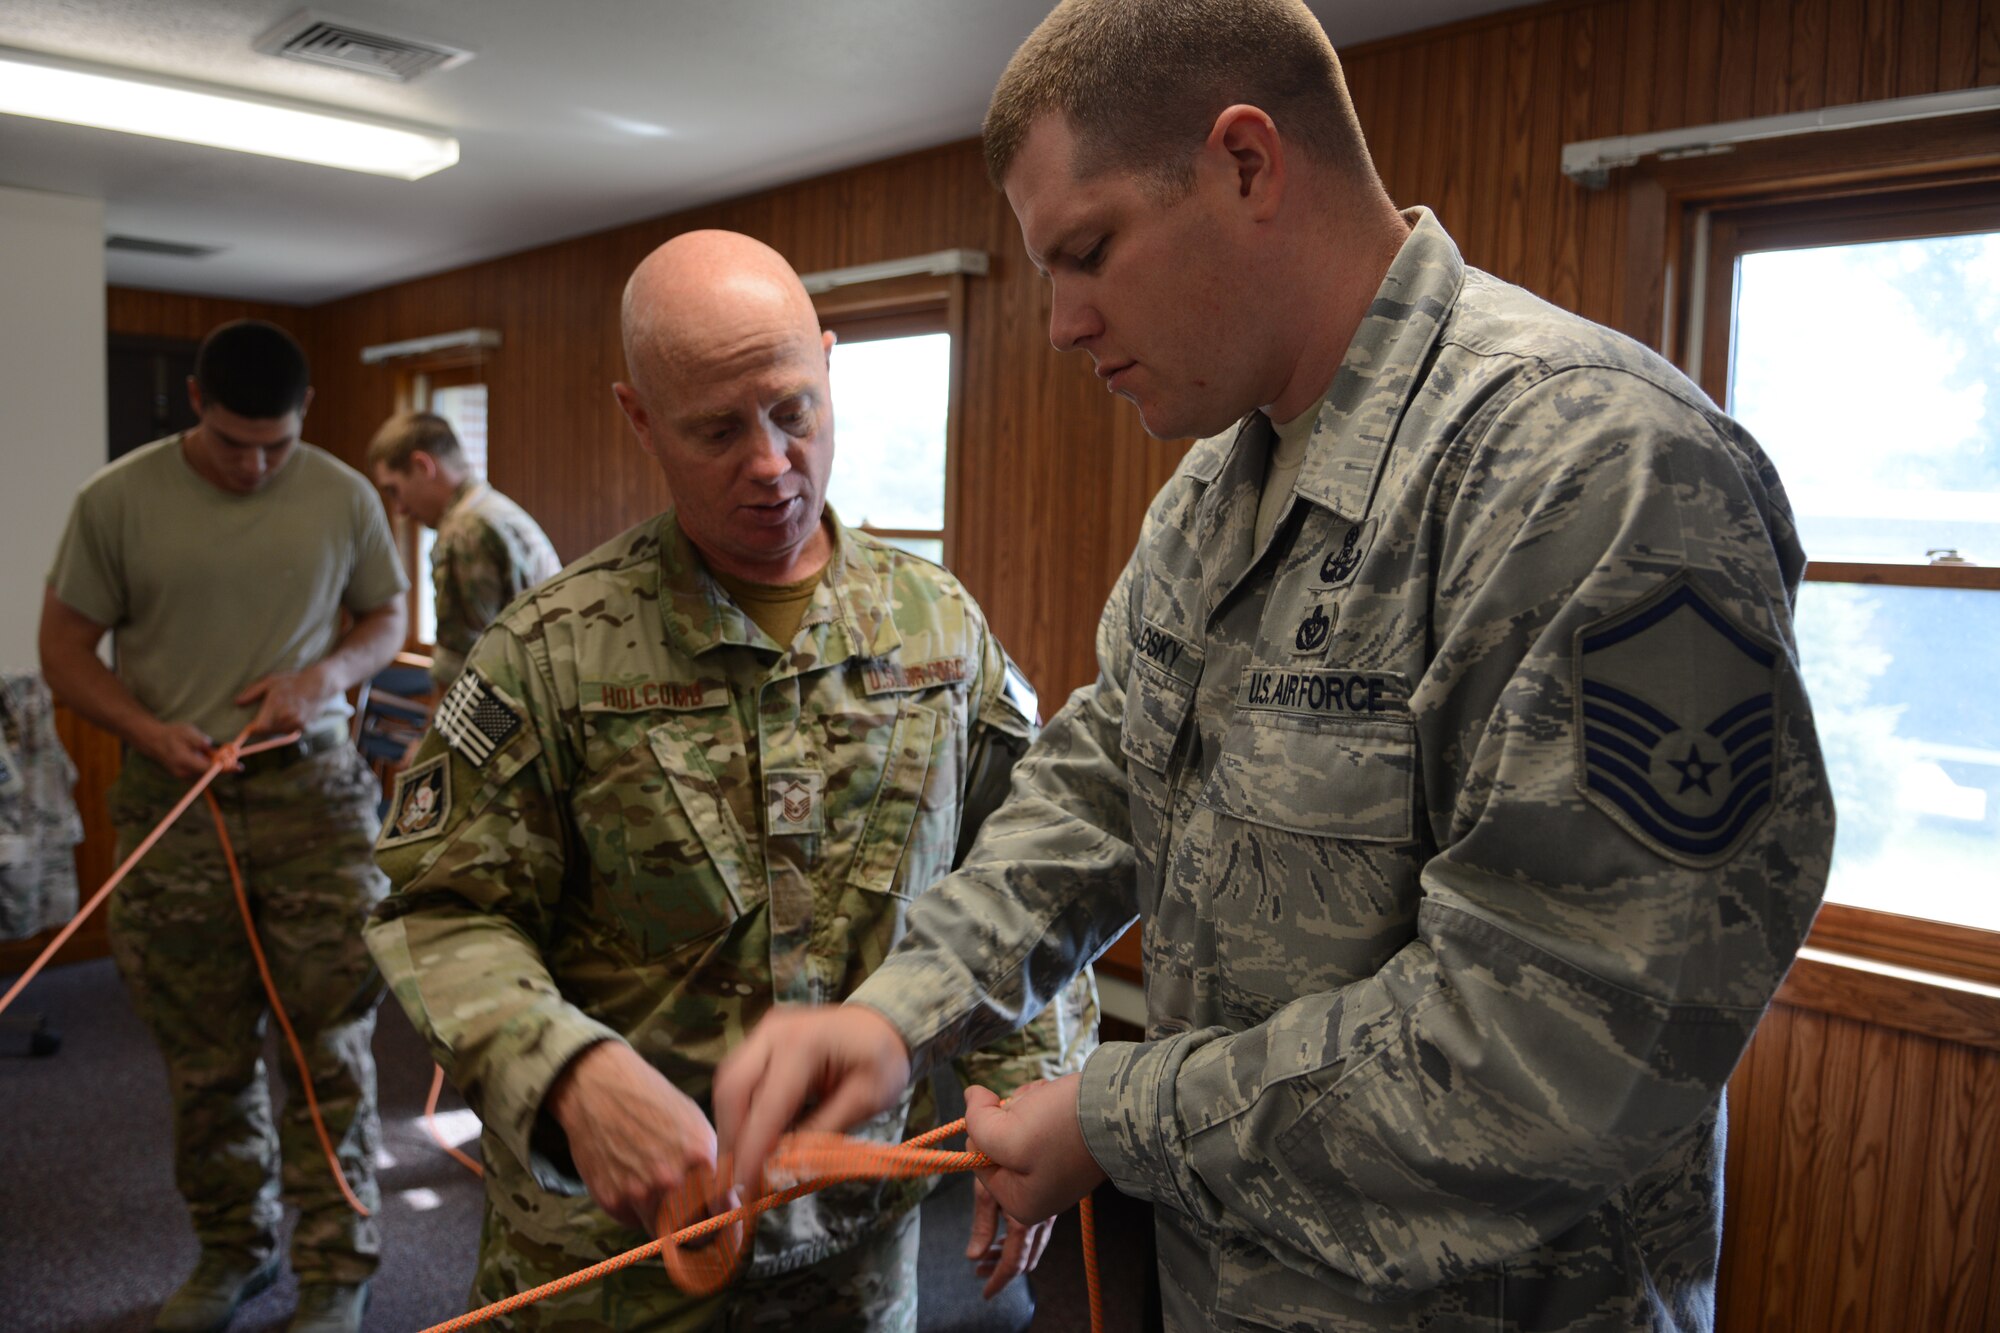 Master Sgt. Gilbert E. Holcomb, 115th Fighter Wing explosive ordnance disposal flight resources non-commissioned officer in-charge, teaches EOD Airmen how to tie proper knots during the 2014 PATRIOT exercise at Volk Field Air National Guard Base, Wis., July 20, 2014. The team later used their knot-tying skills to safely lower themselves down a three-story building. (Air National Guard photo by Senior Airman Andrea F. Liechti)